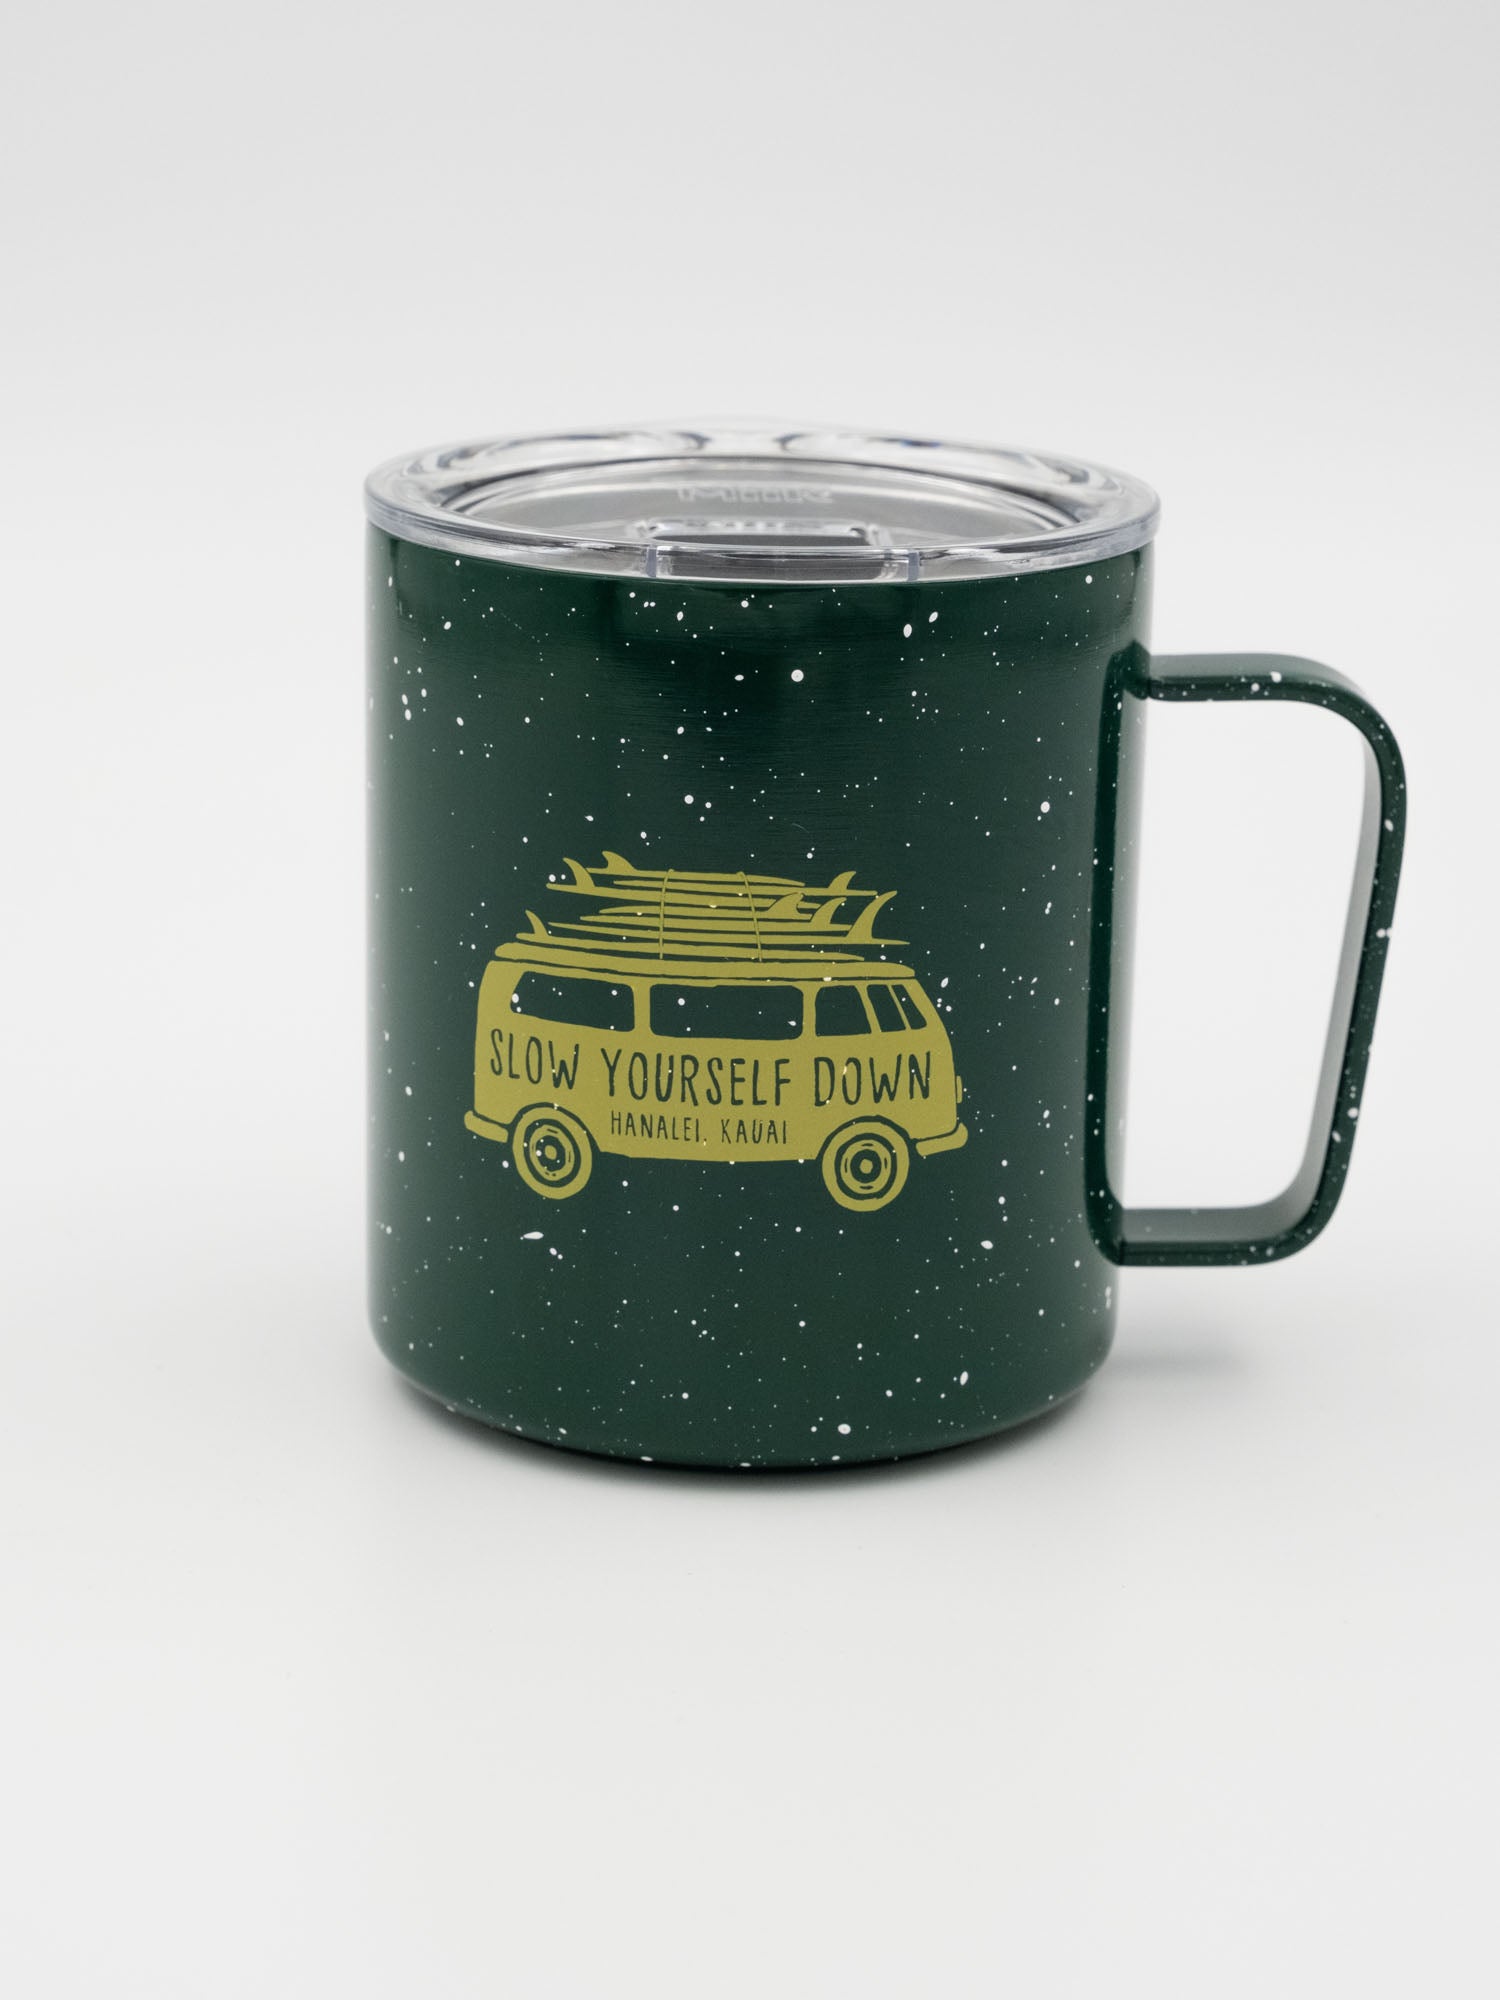 Insulated Camp Cup - Surf Van Drinkware - Slow Yourself Down